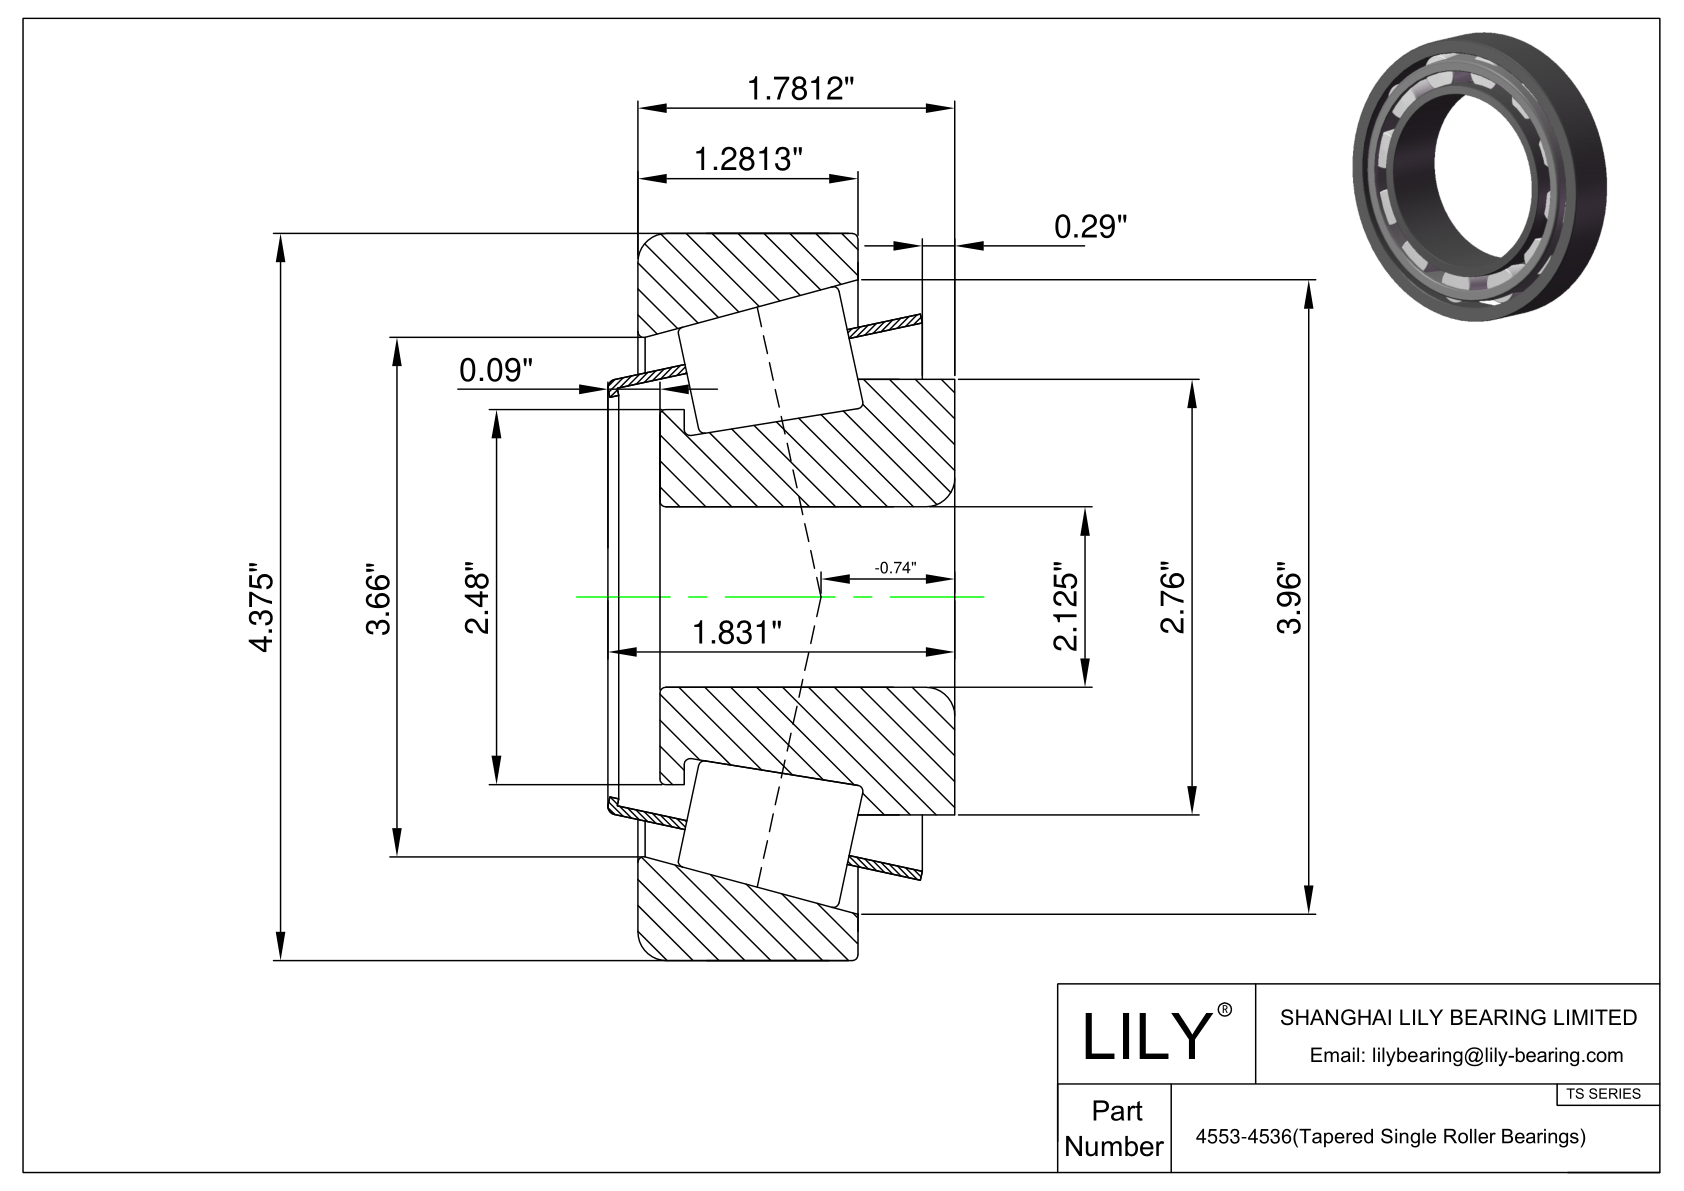 4553-4536 TS (Tapered Single Roller Bearings) (Imperial) cad drawing